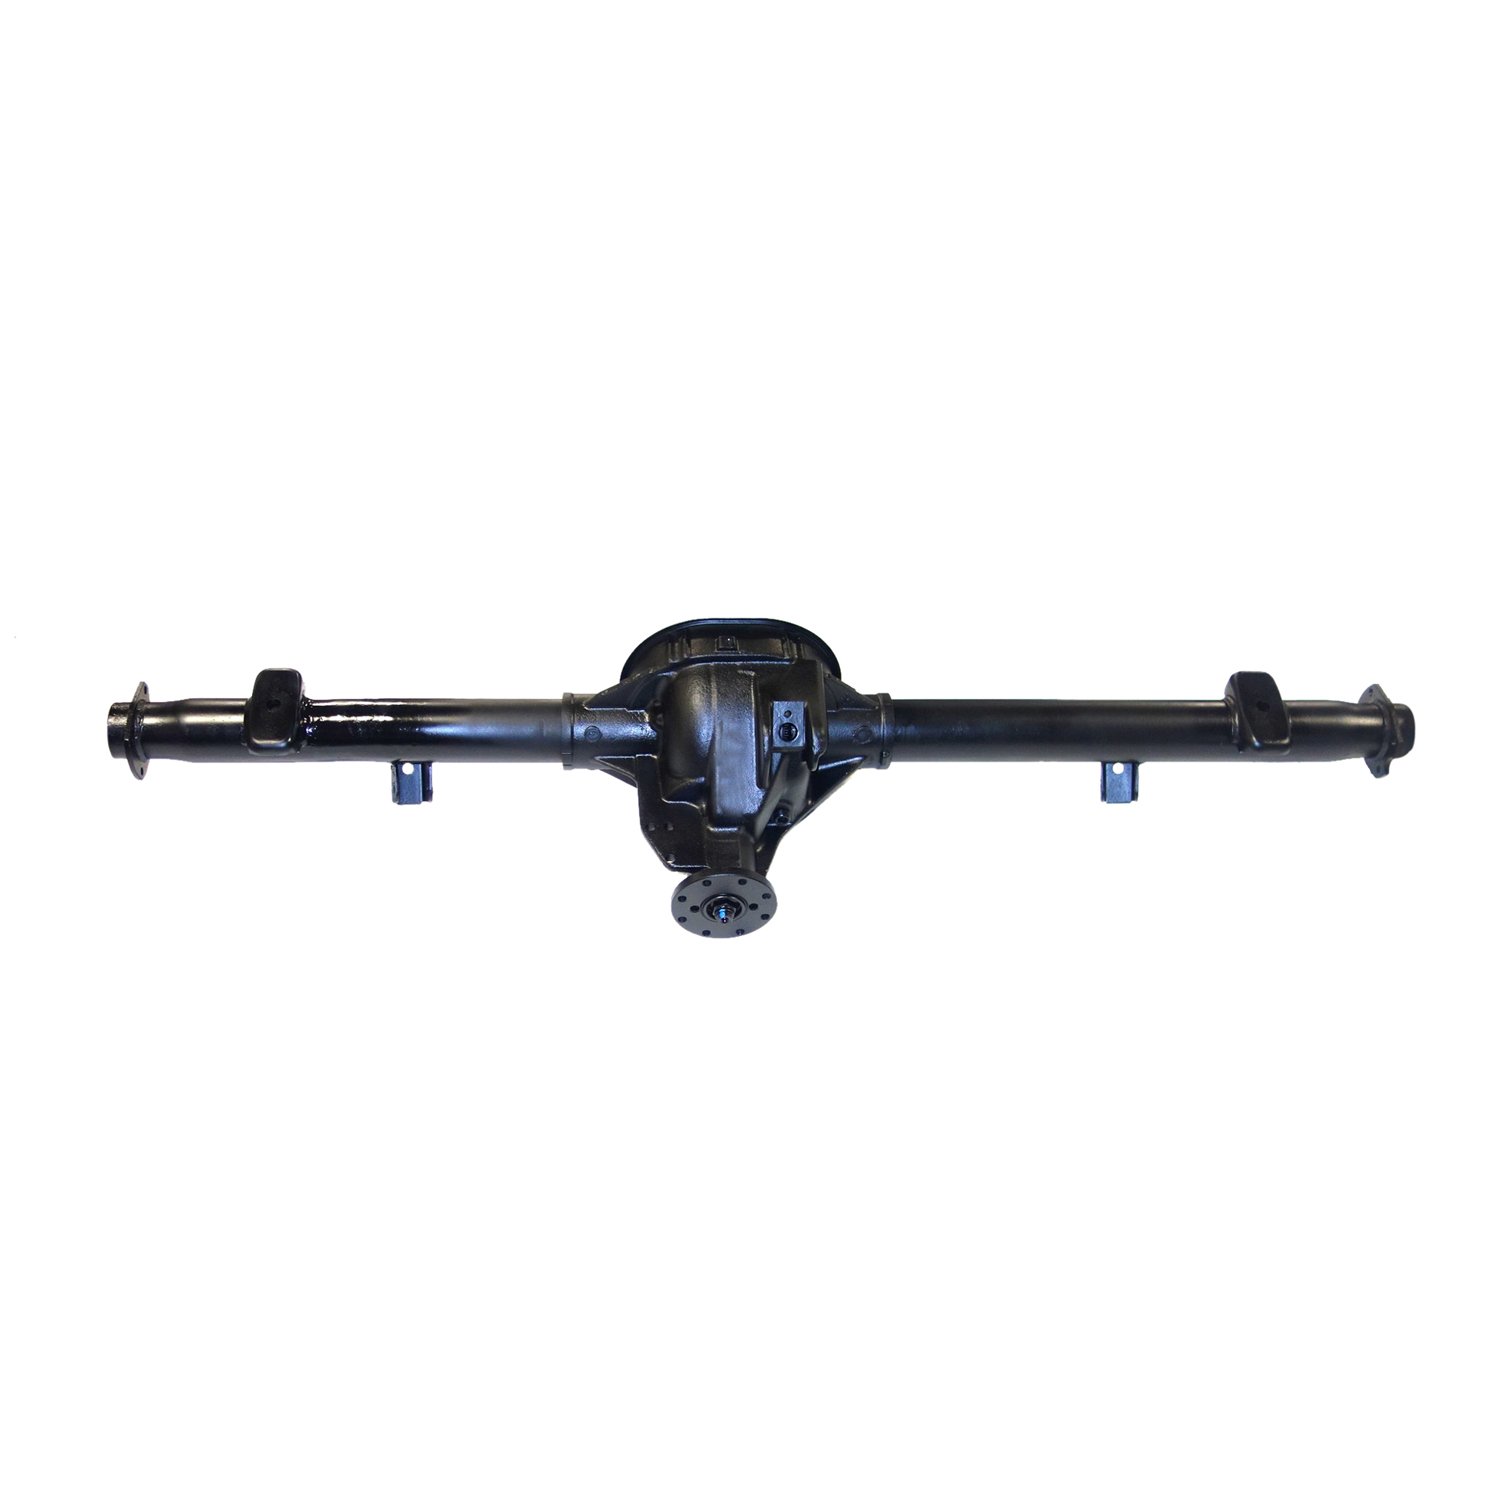 Remanufactured Axle Assy for 8.8" 2000 F150 3.08 , Rear Drum, Posi LSD *Check Tag*